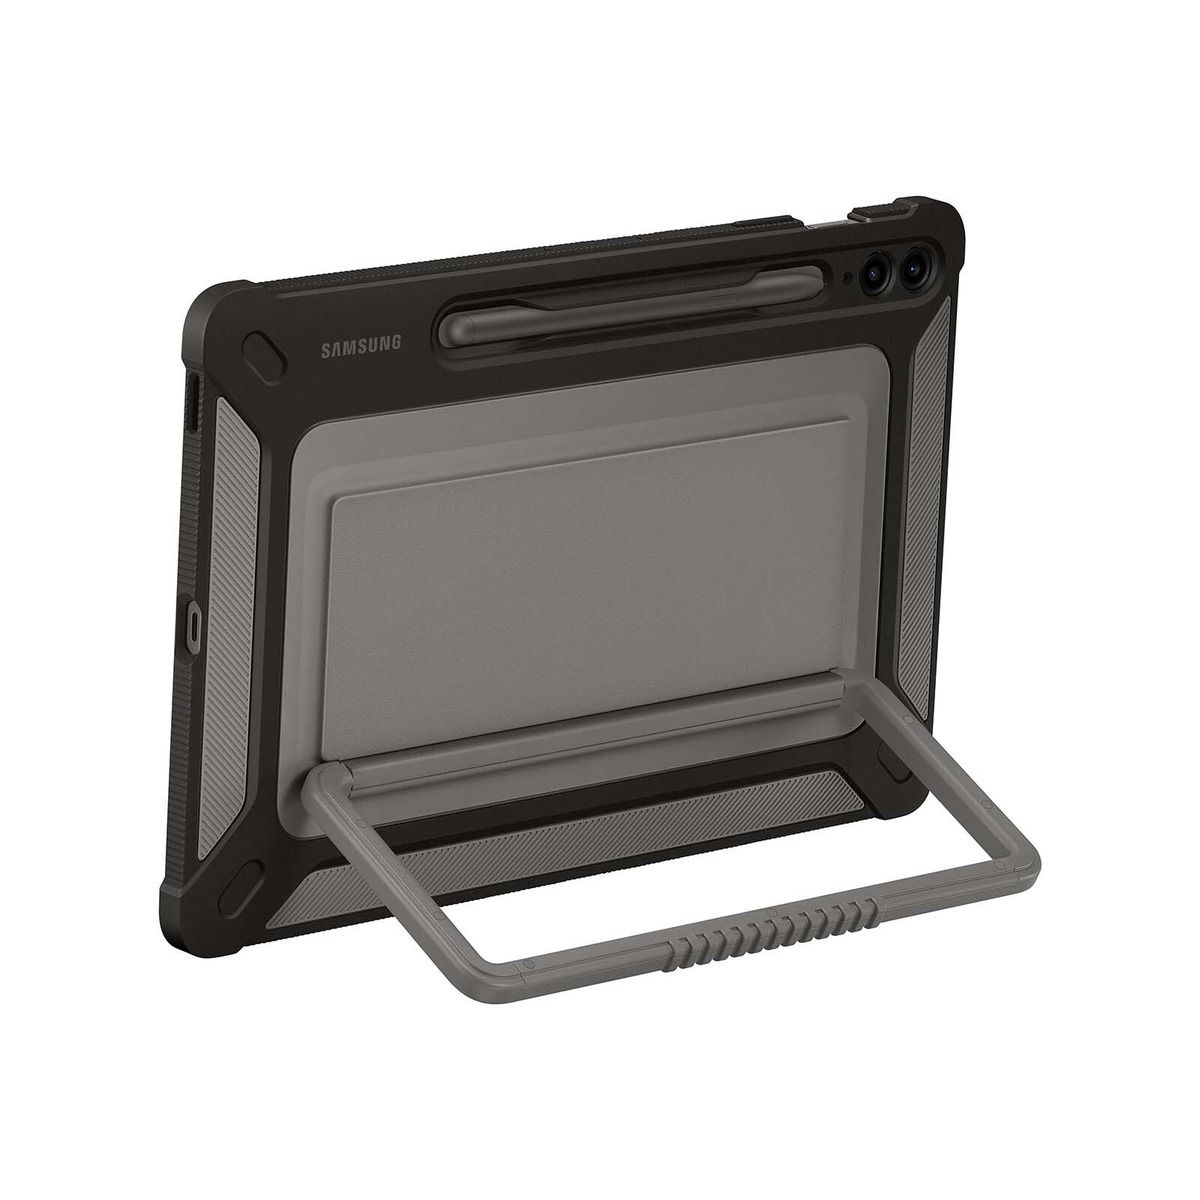 Samsung Outdoor Case for Galaxy Tab S9 FE+ against a white background